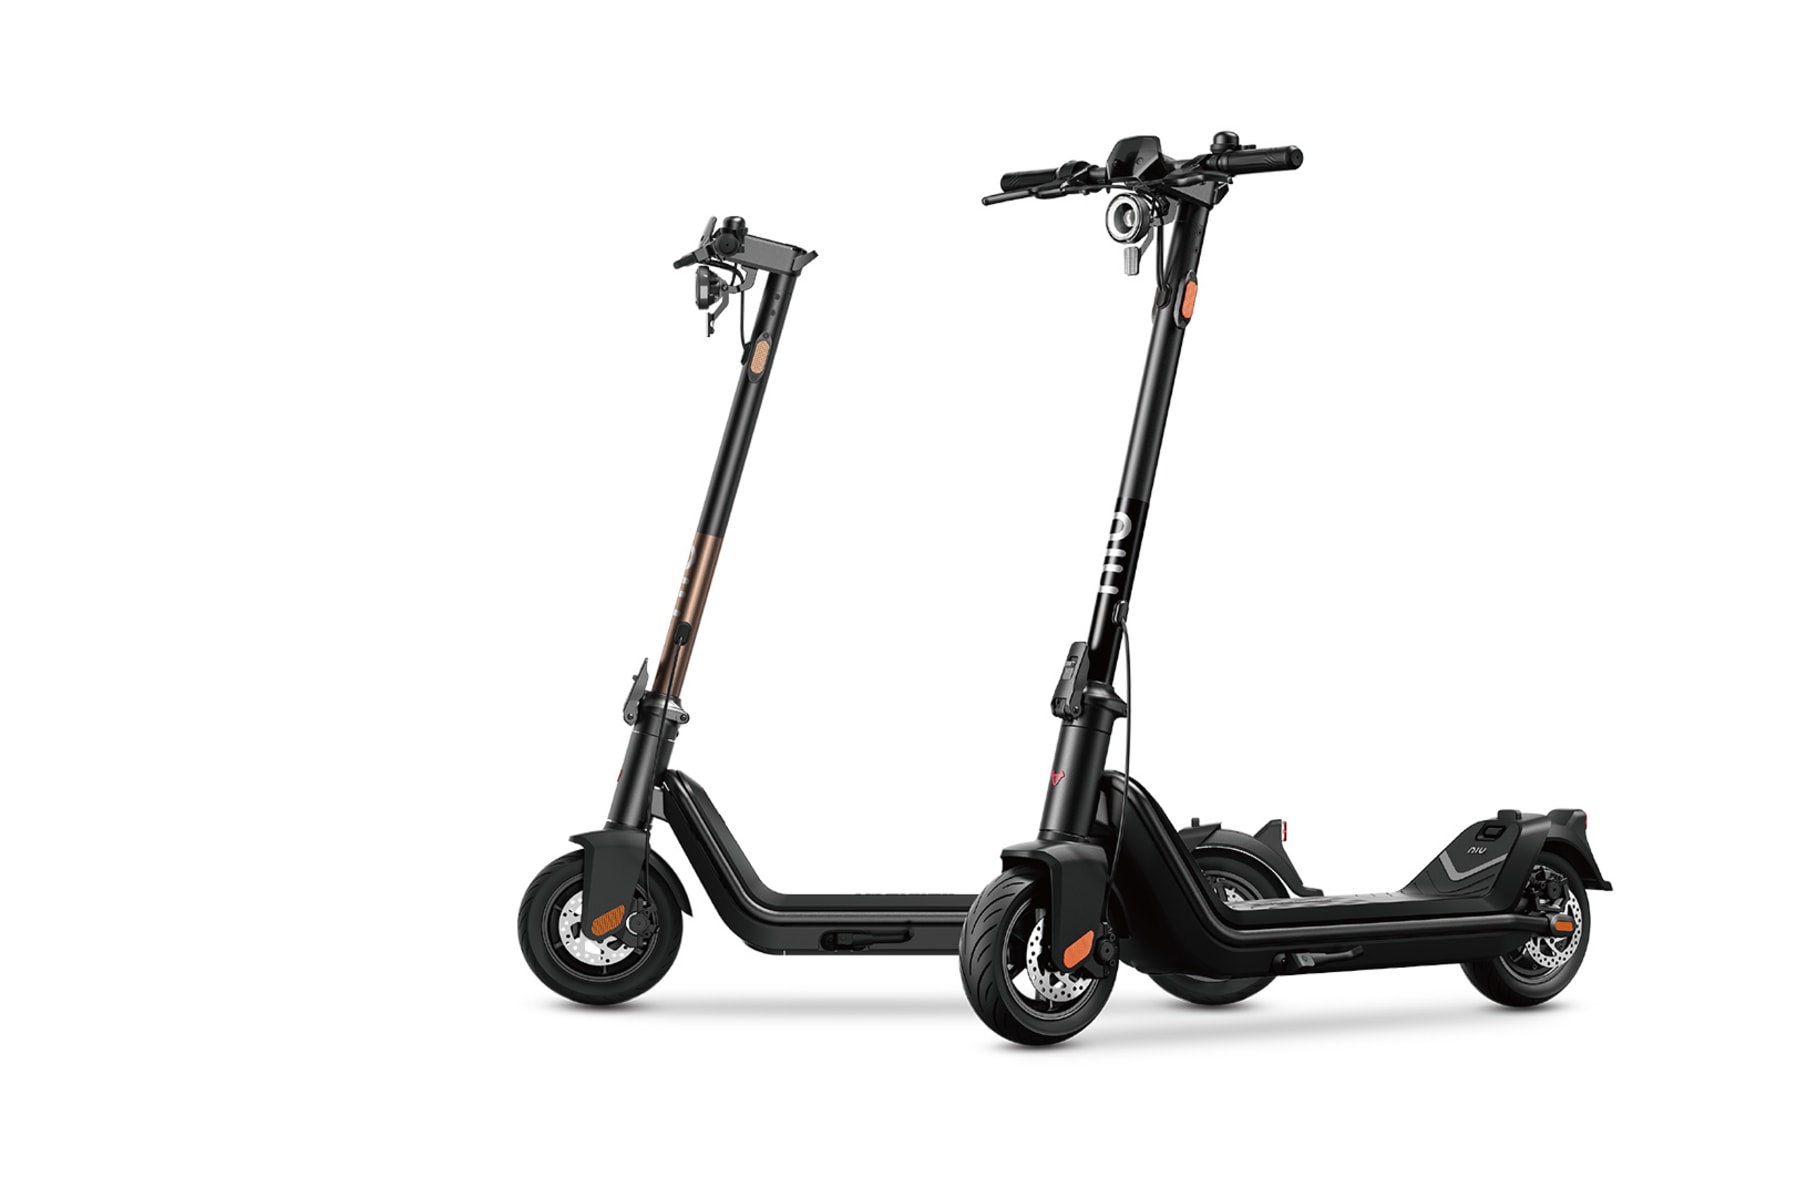 NIU World's ULTIMATE Commuter Scooter | Indiegogo